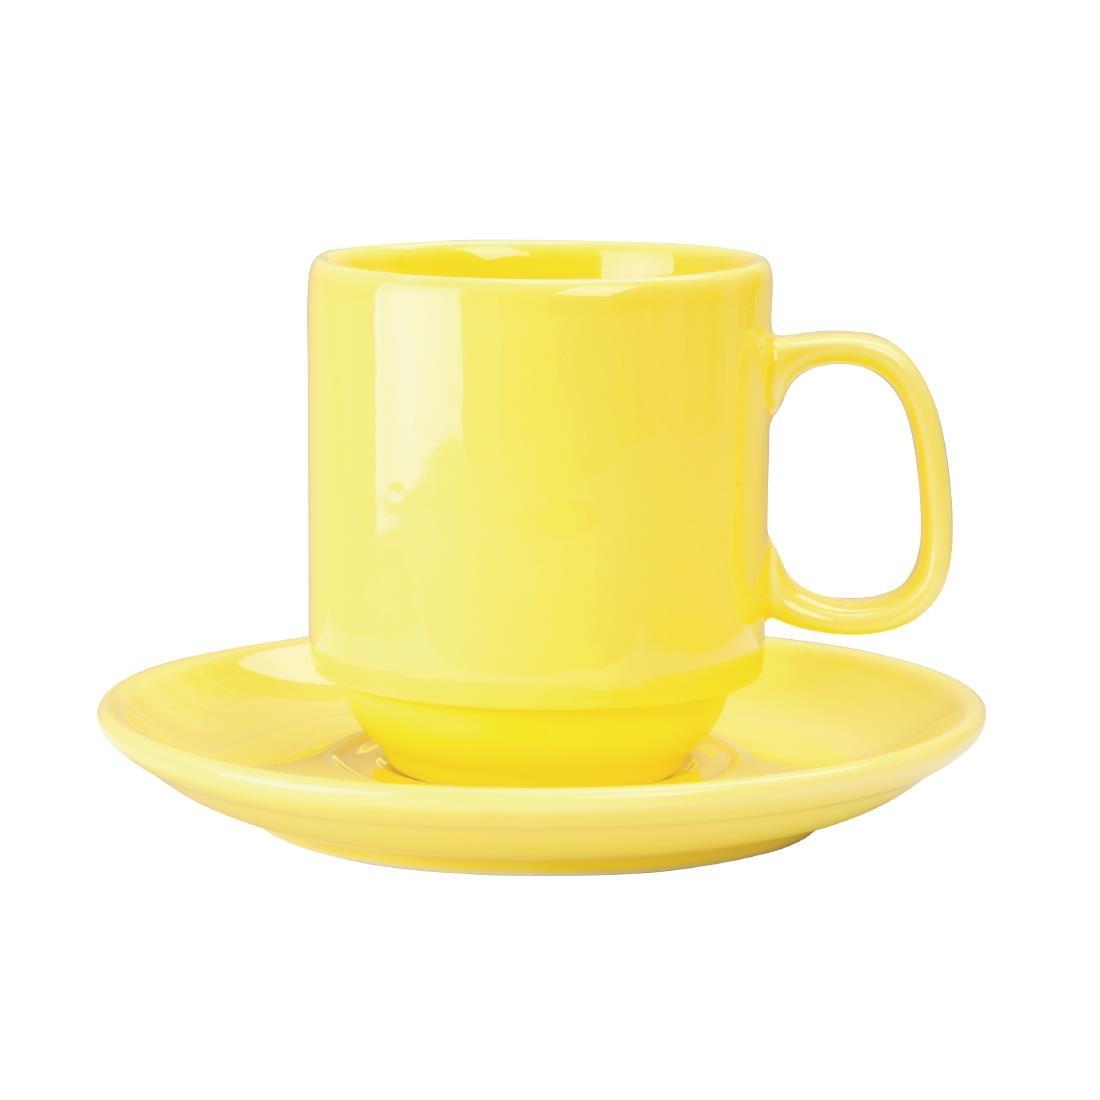 Olympia Heritage Stacking Mugs Yellow 300ml (Pack of 6) - DW150  - 2